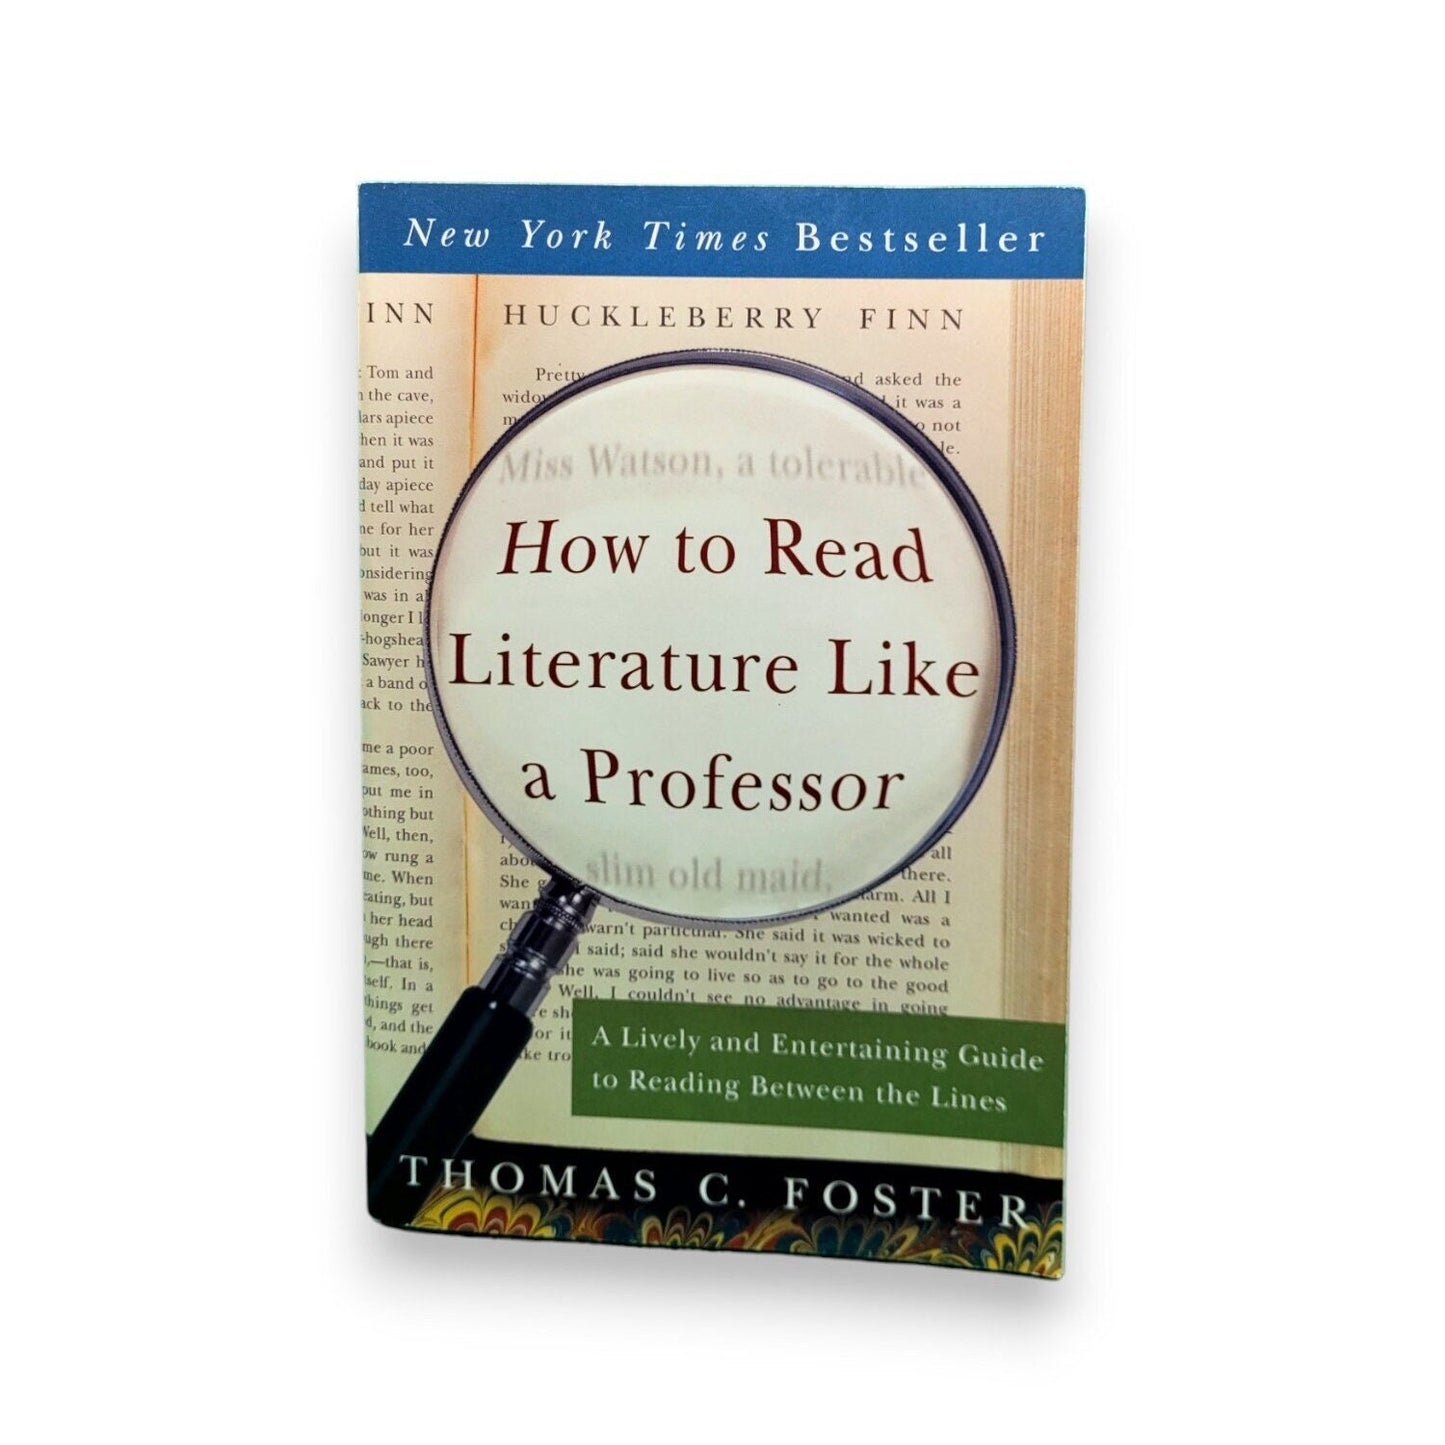 How to Read Literature Like a Professor by Thomas C. Foster 2003